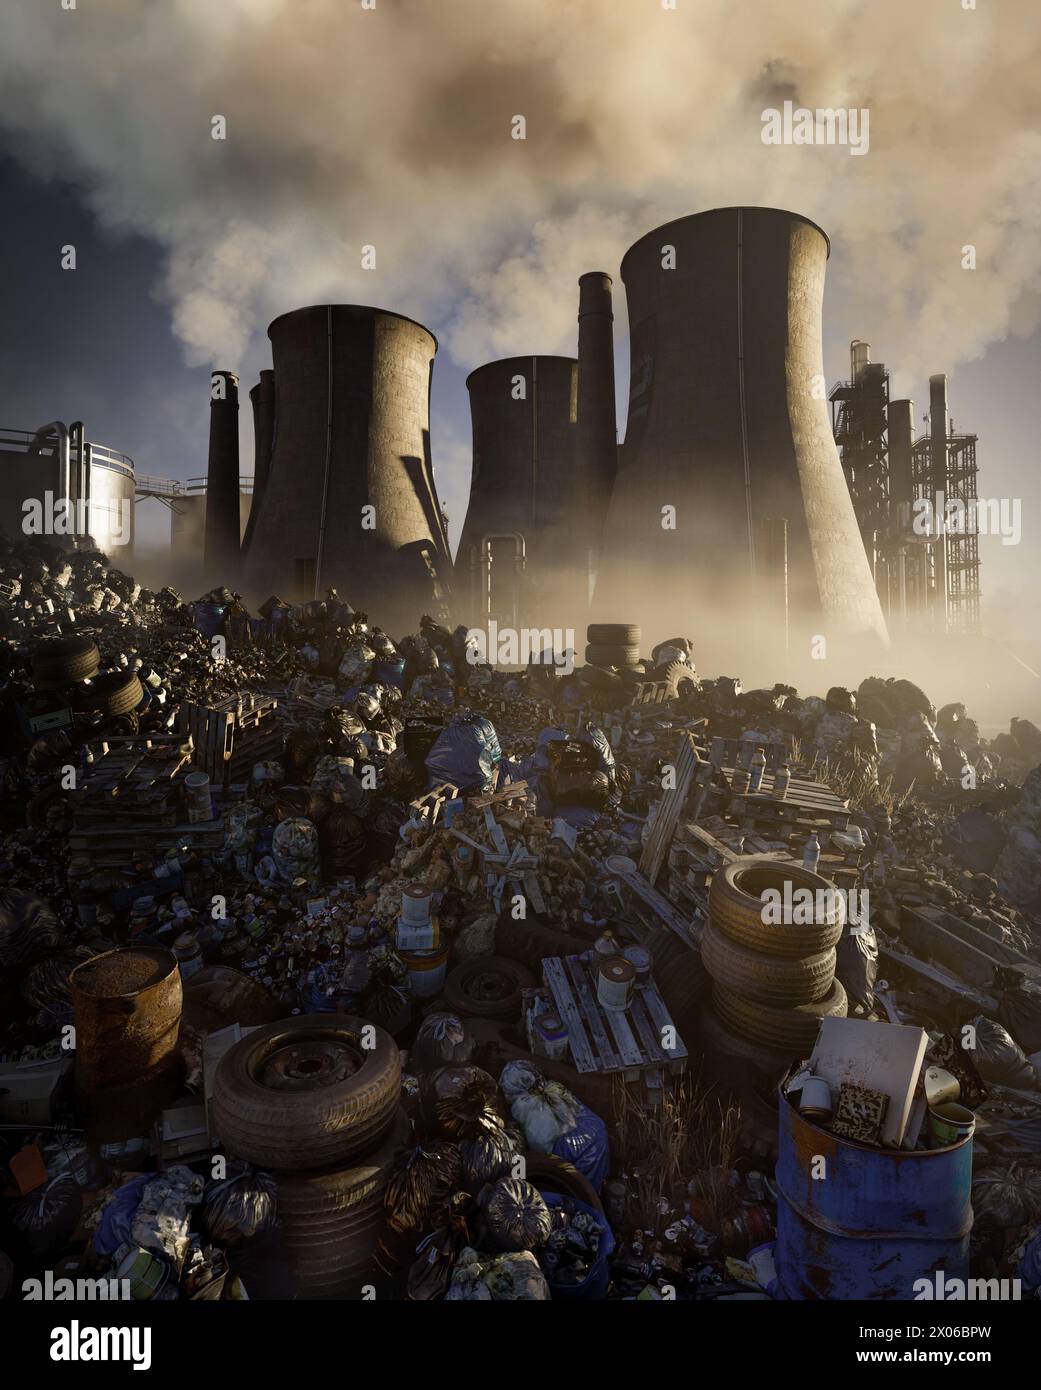 Power plant emitting polluted air with smokestacks and toxic garbage in foreground Stock Photo